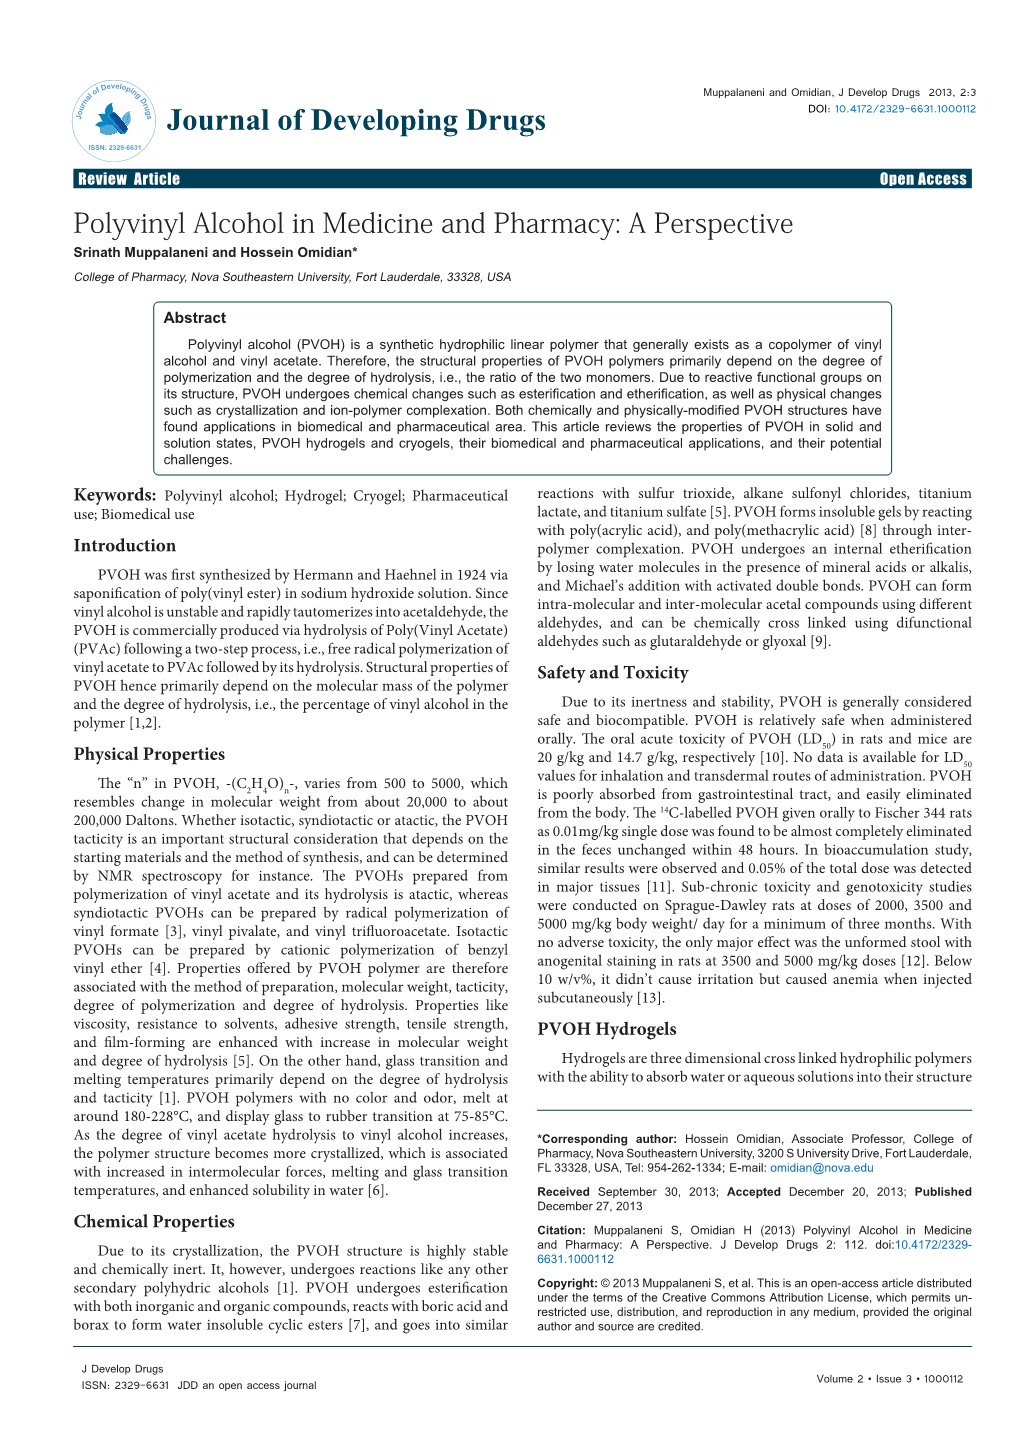 Polyvinyl Alcohol in Medicine and Pharmacy